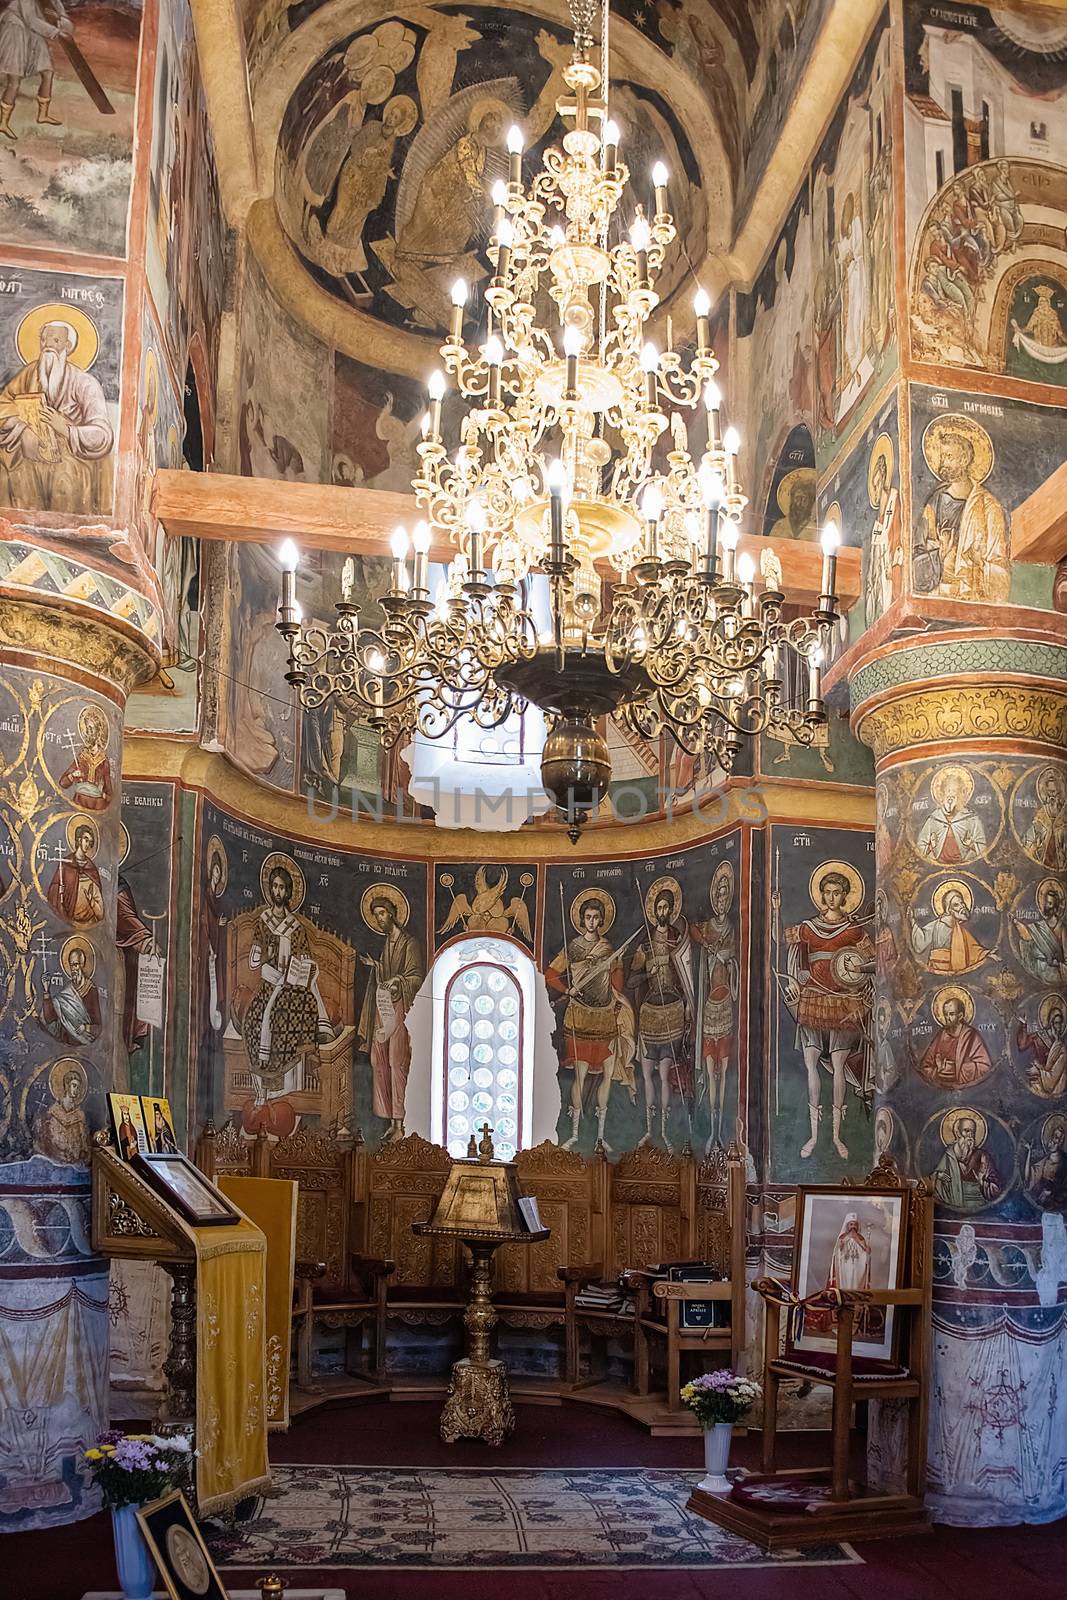 Snagov, Romania - Aug 2019: Interior of Snagov Monastary, the supposed resting place of Vlad the Impaler